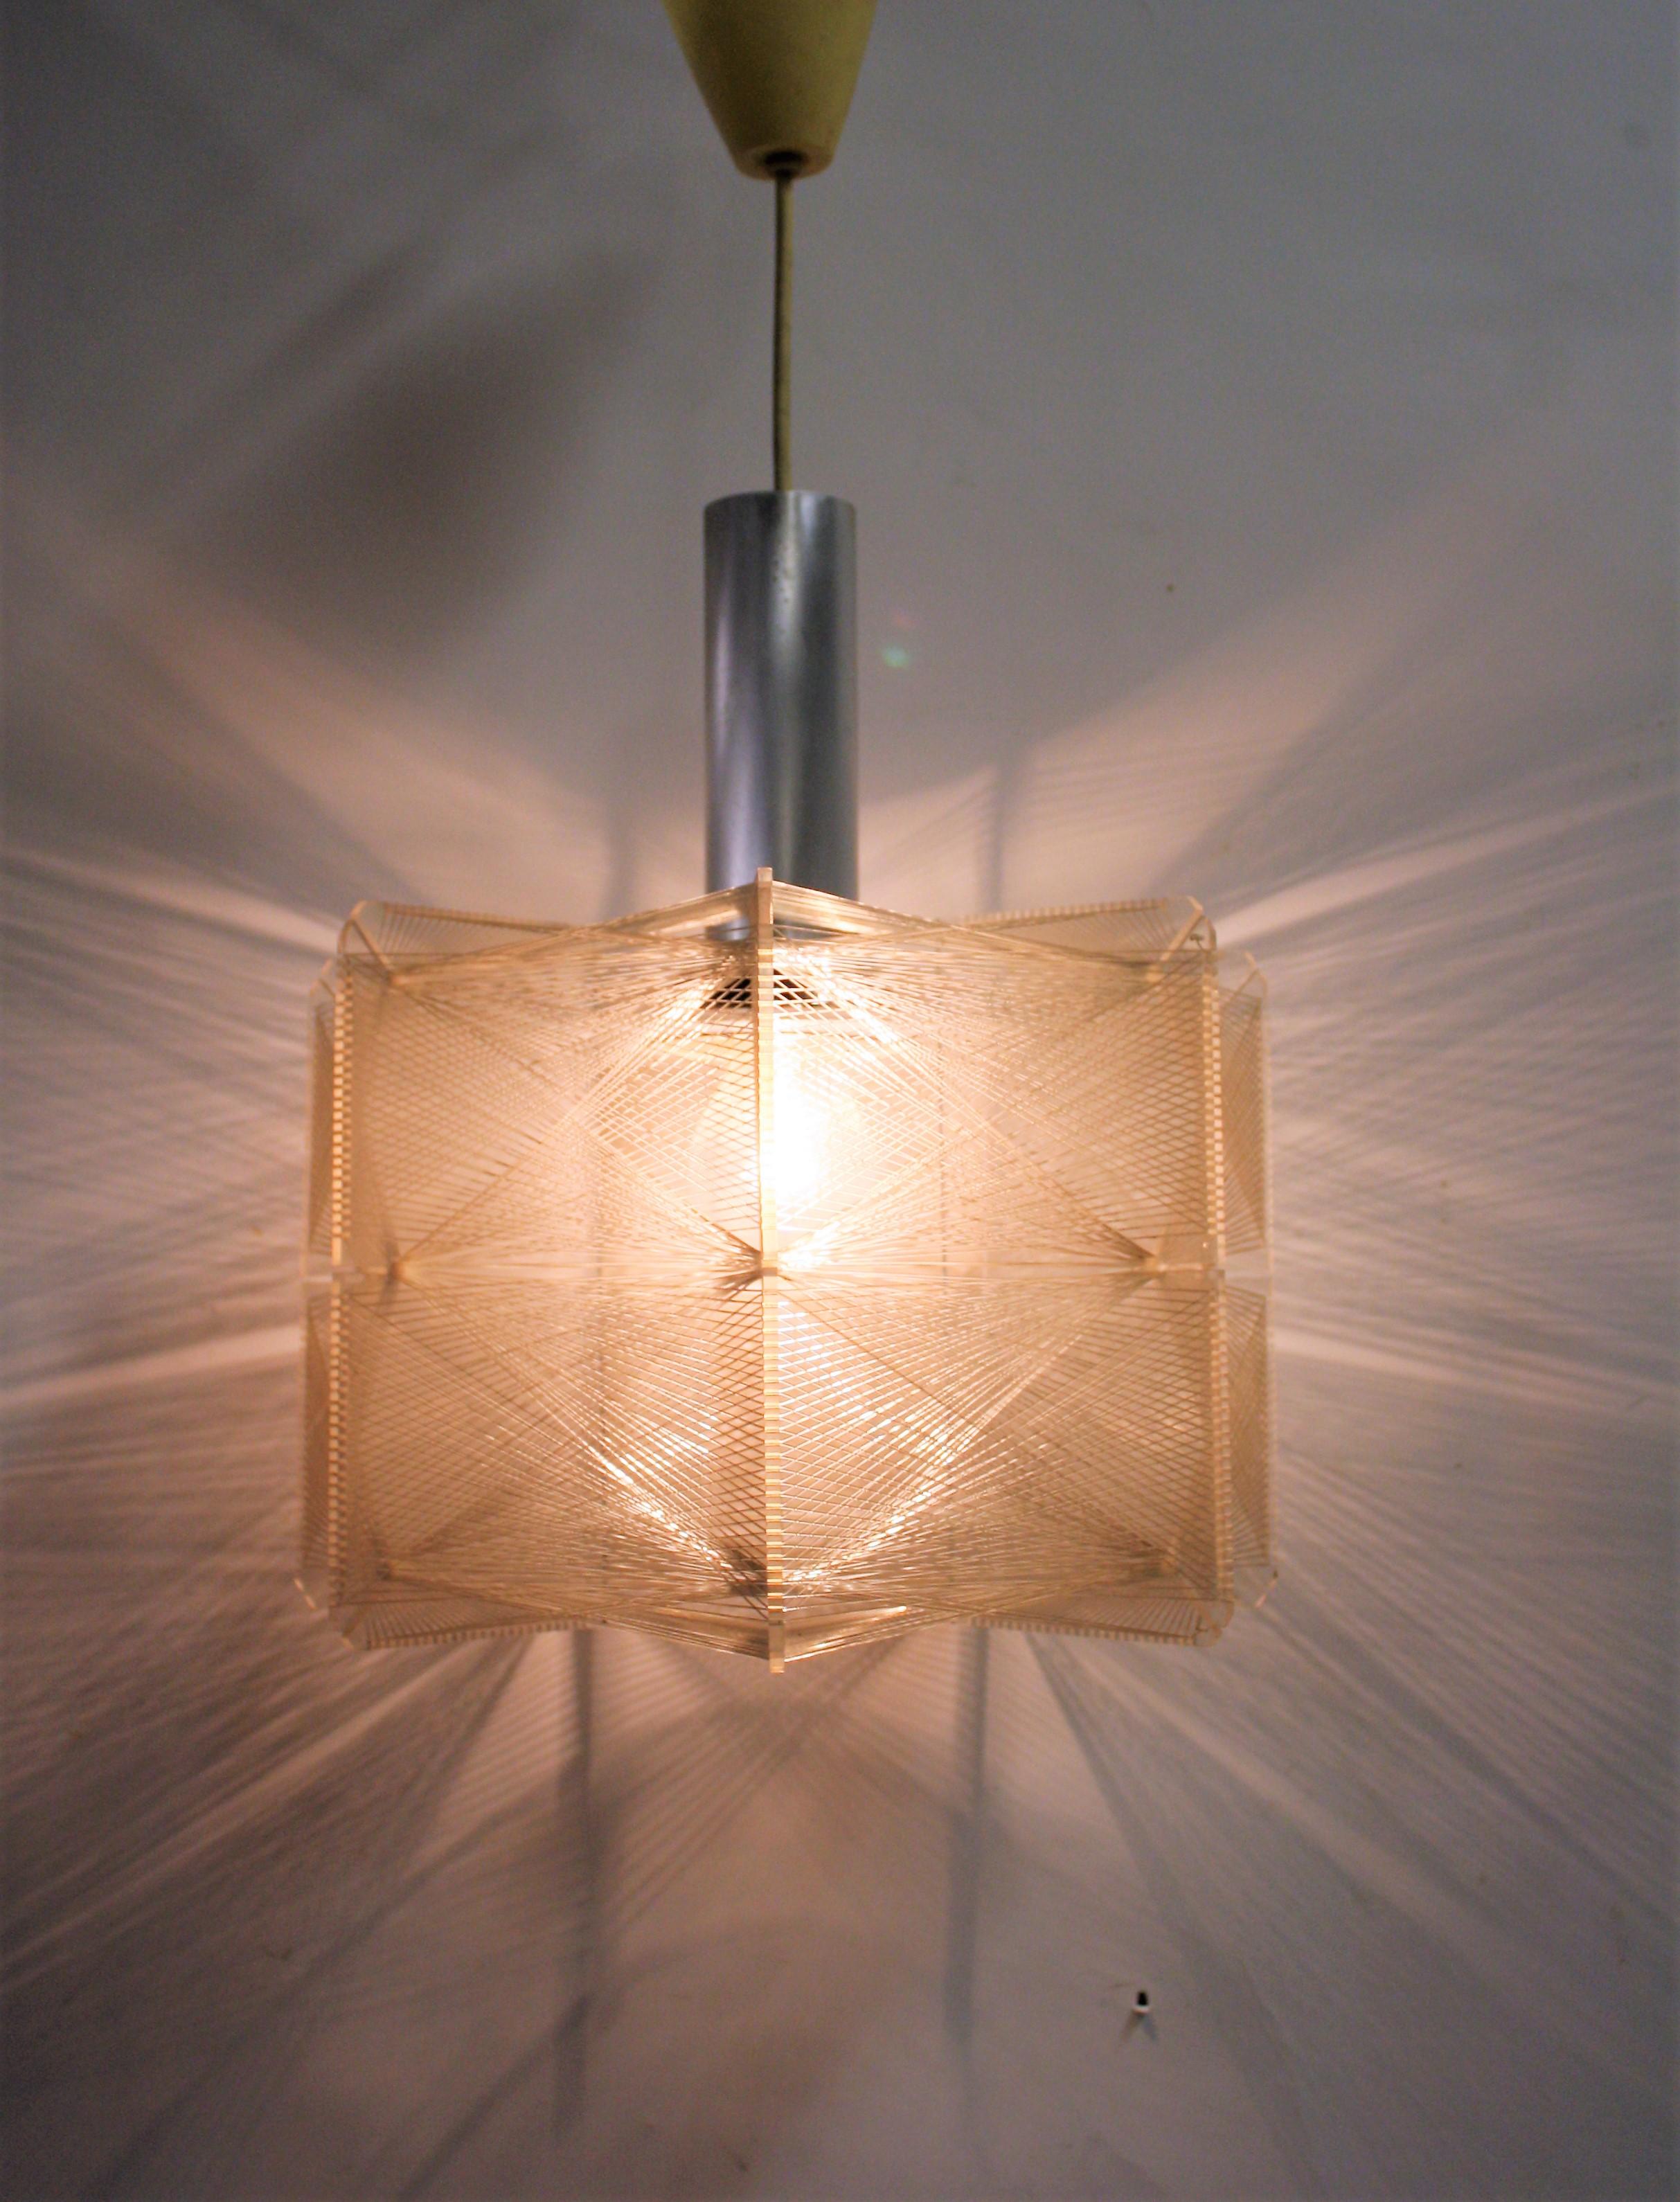 Midcentury chandelier designed by Paul Secon for Sompex.

The light is made of an acrylic/Lucite frame with nylon wires woven all around the chandelier to create a most loving light effect.

Very good condition, no missing wires.

The light is